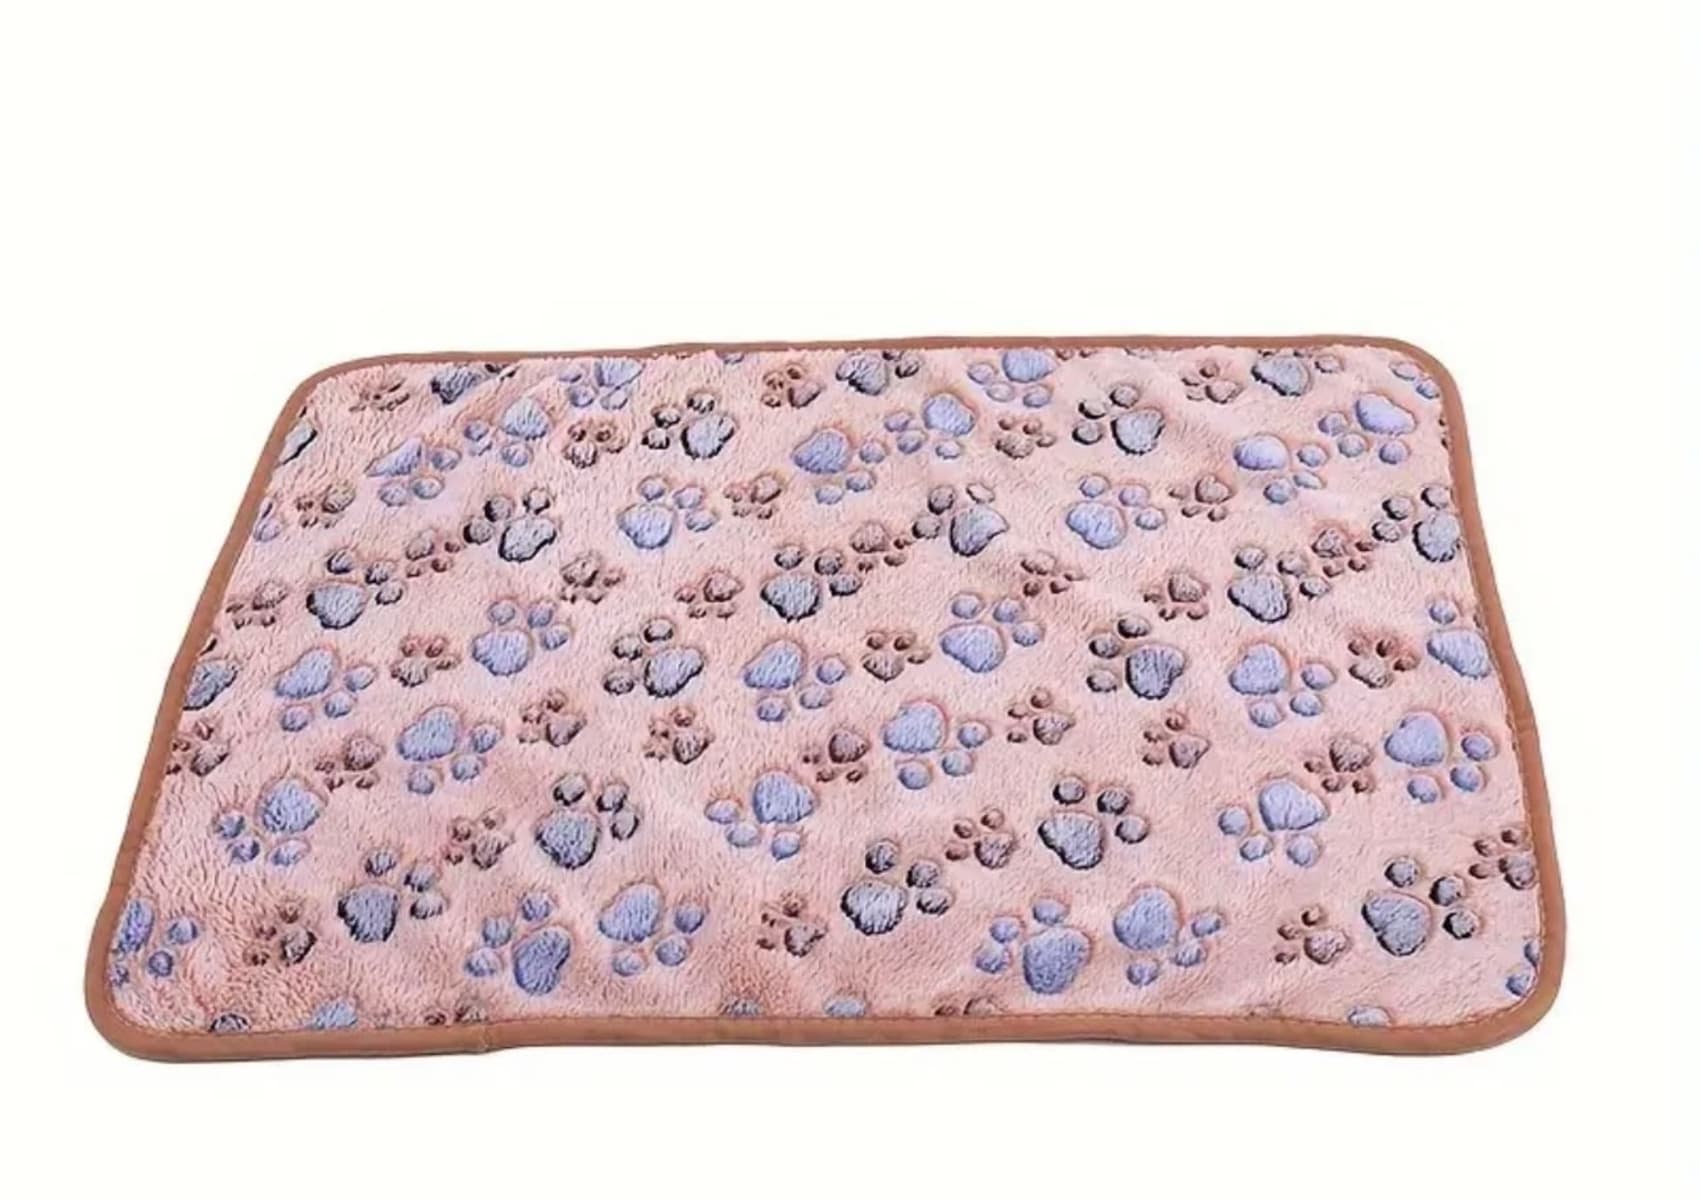 Soft snuggly peach paw print pattern blanket for your cat or dog